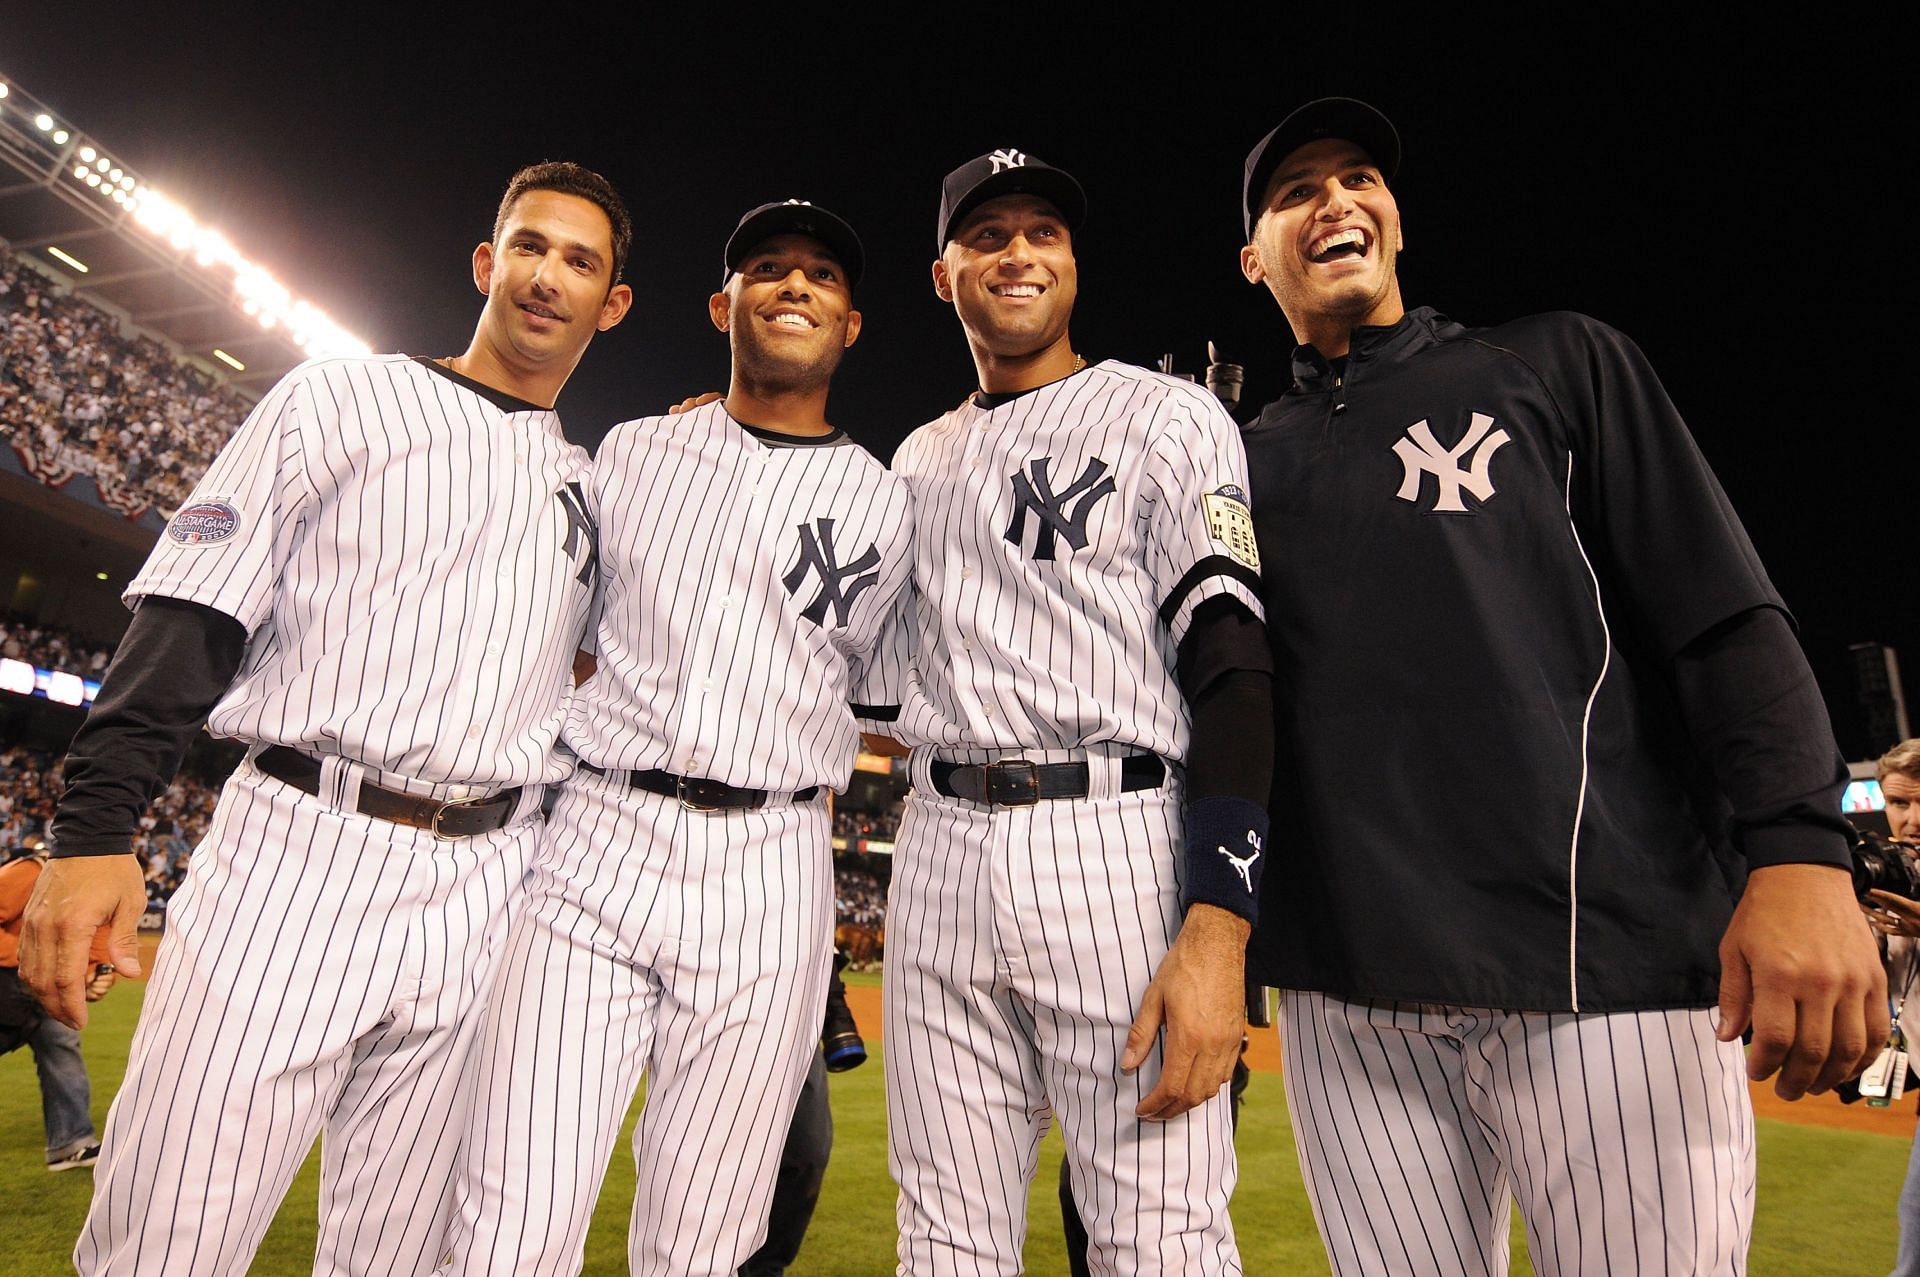 Jorge Posada, Mariano Rivera, Derek Jeter, and Andy Pettitte &quot;The Core Four&quot;